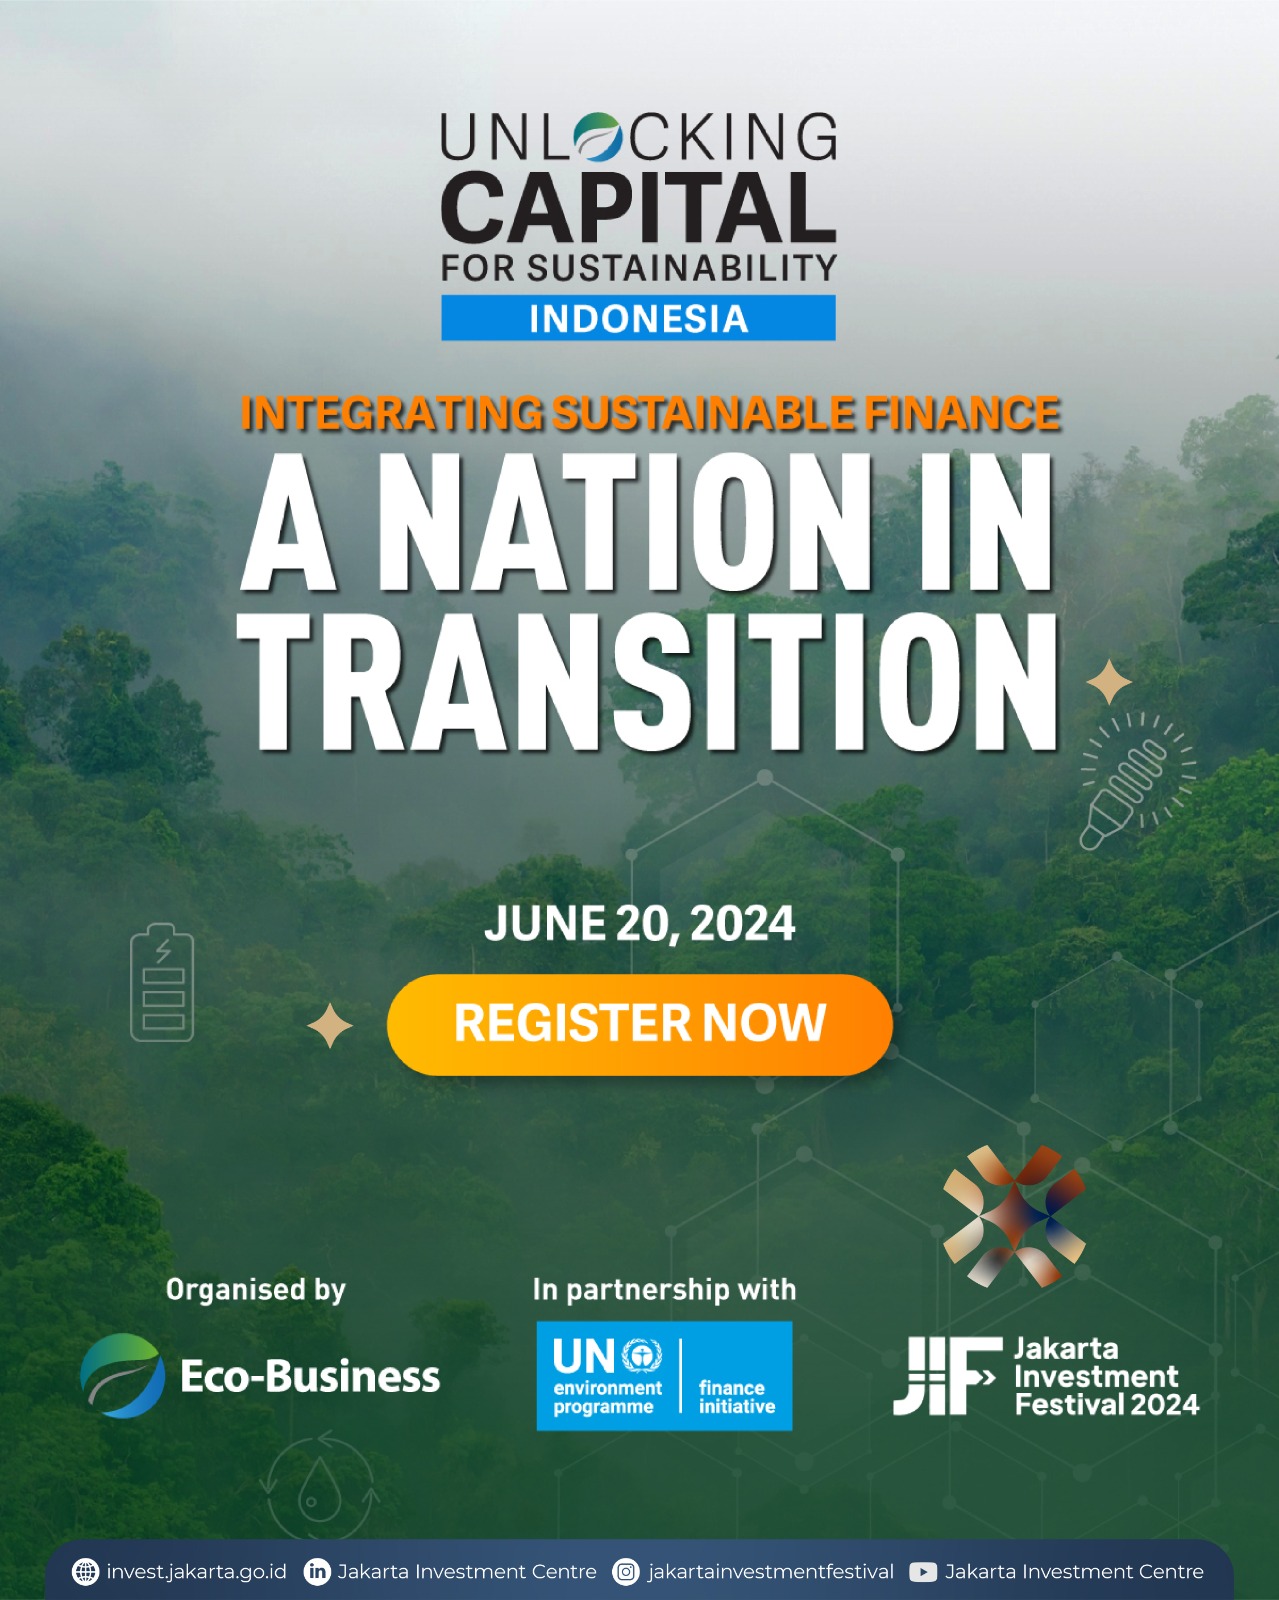 UCFS Indonesia - Integrating Sustainable Finance: A nation in transition